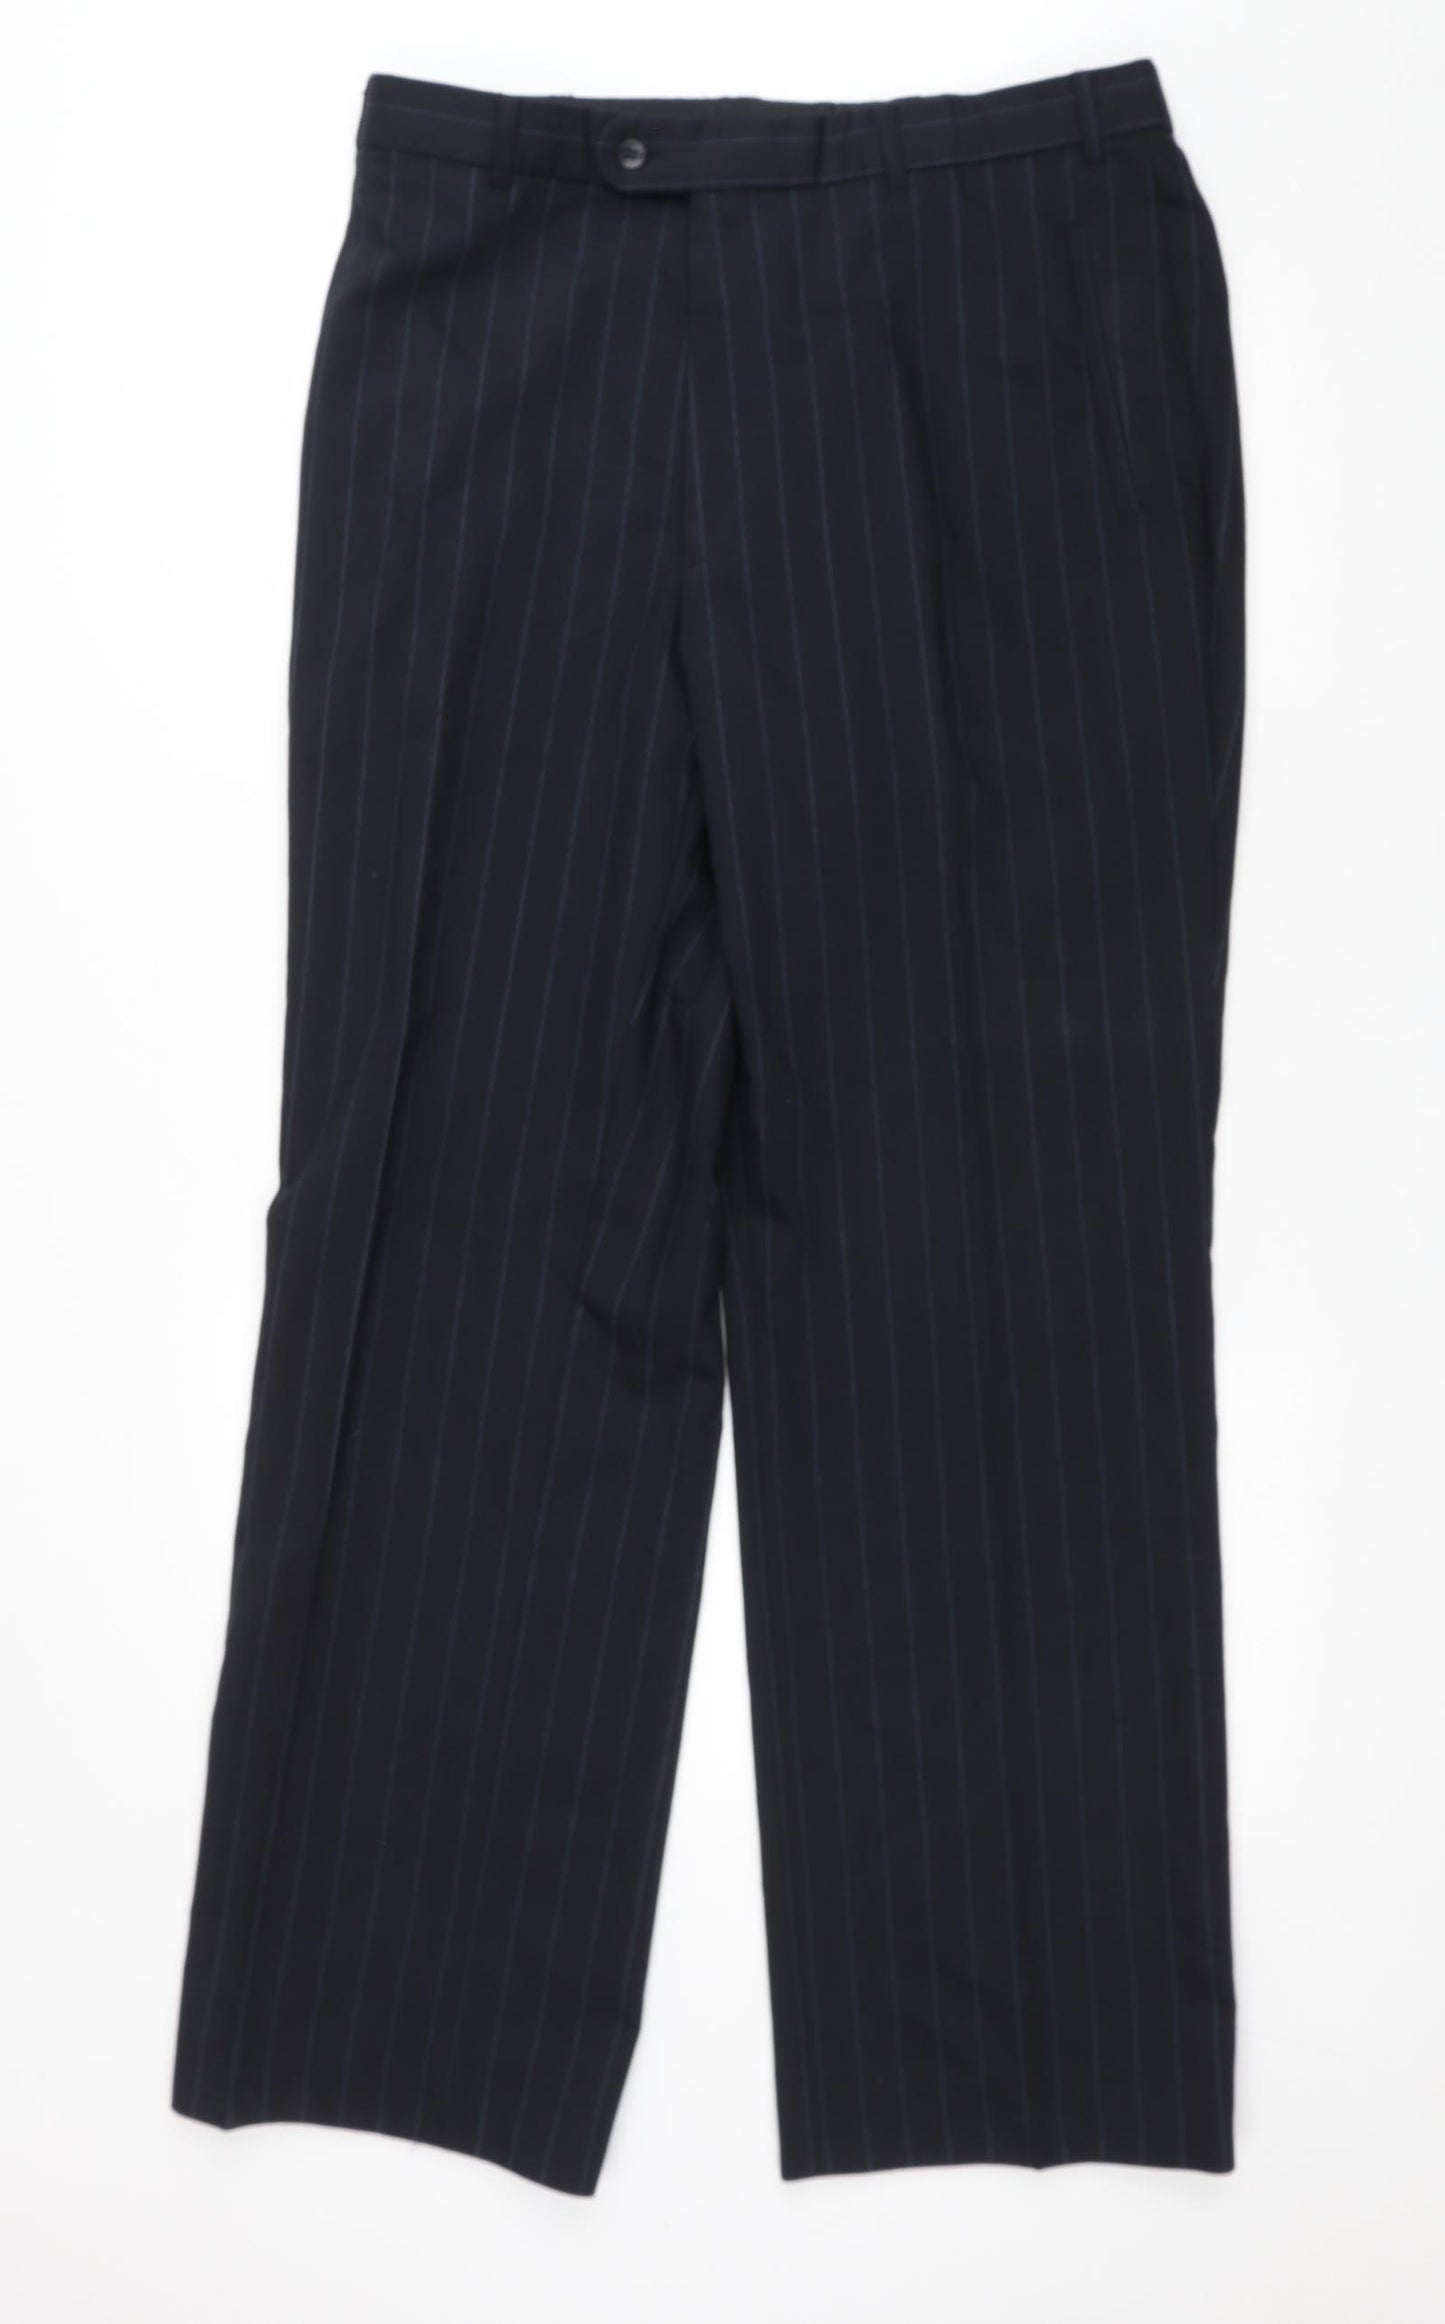 REMUS Mens Black Striped Polyester Dress Pants Trousers Size 34 L31 in Regular Zip